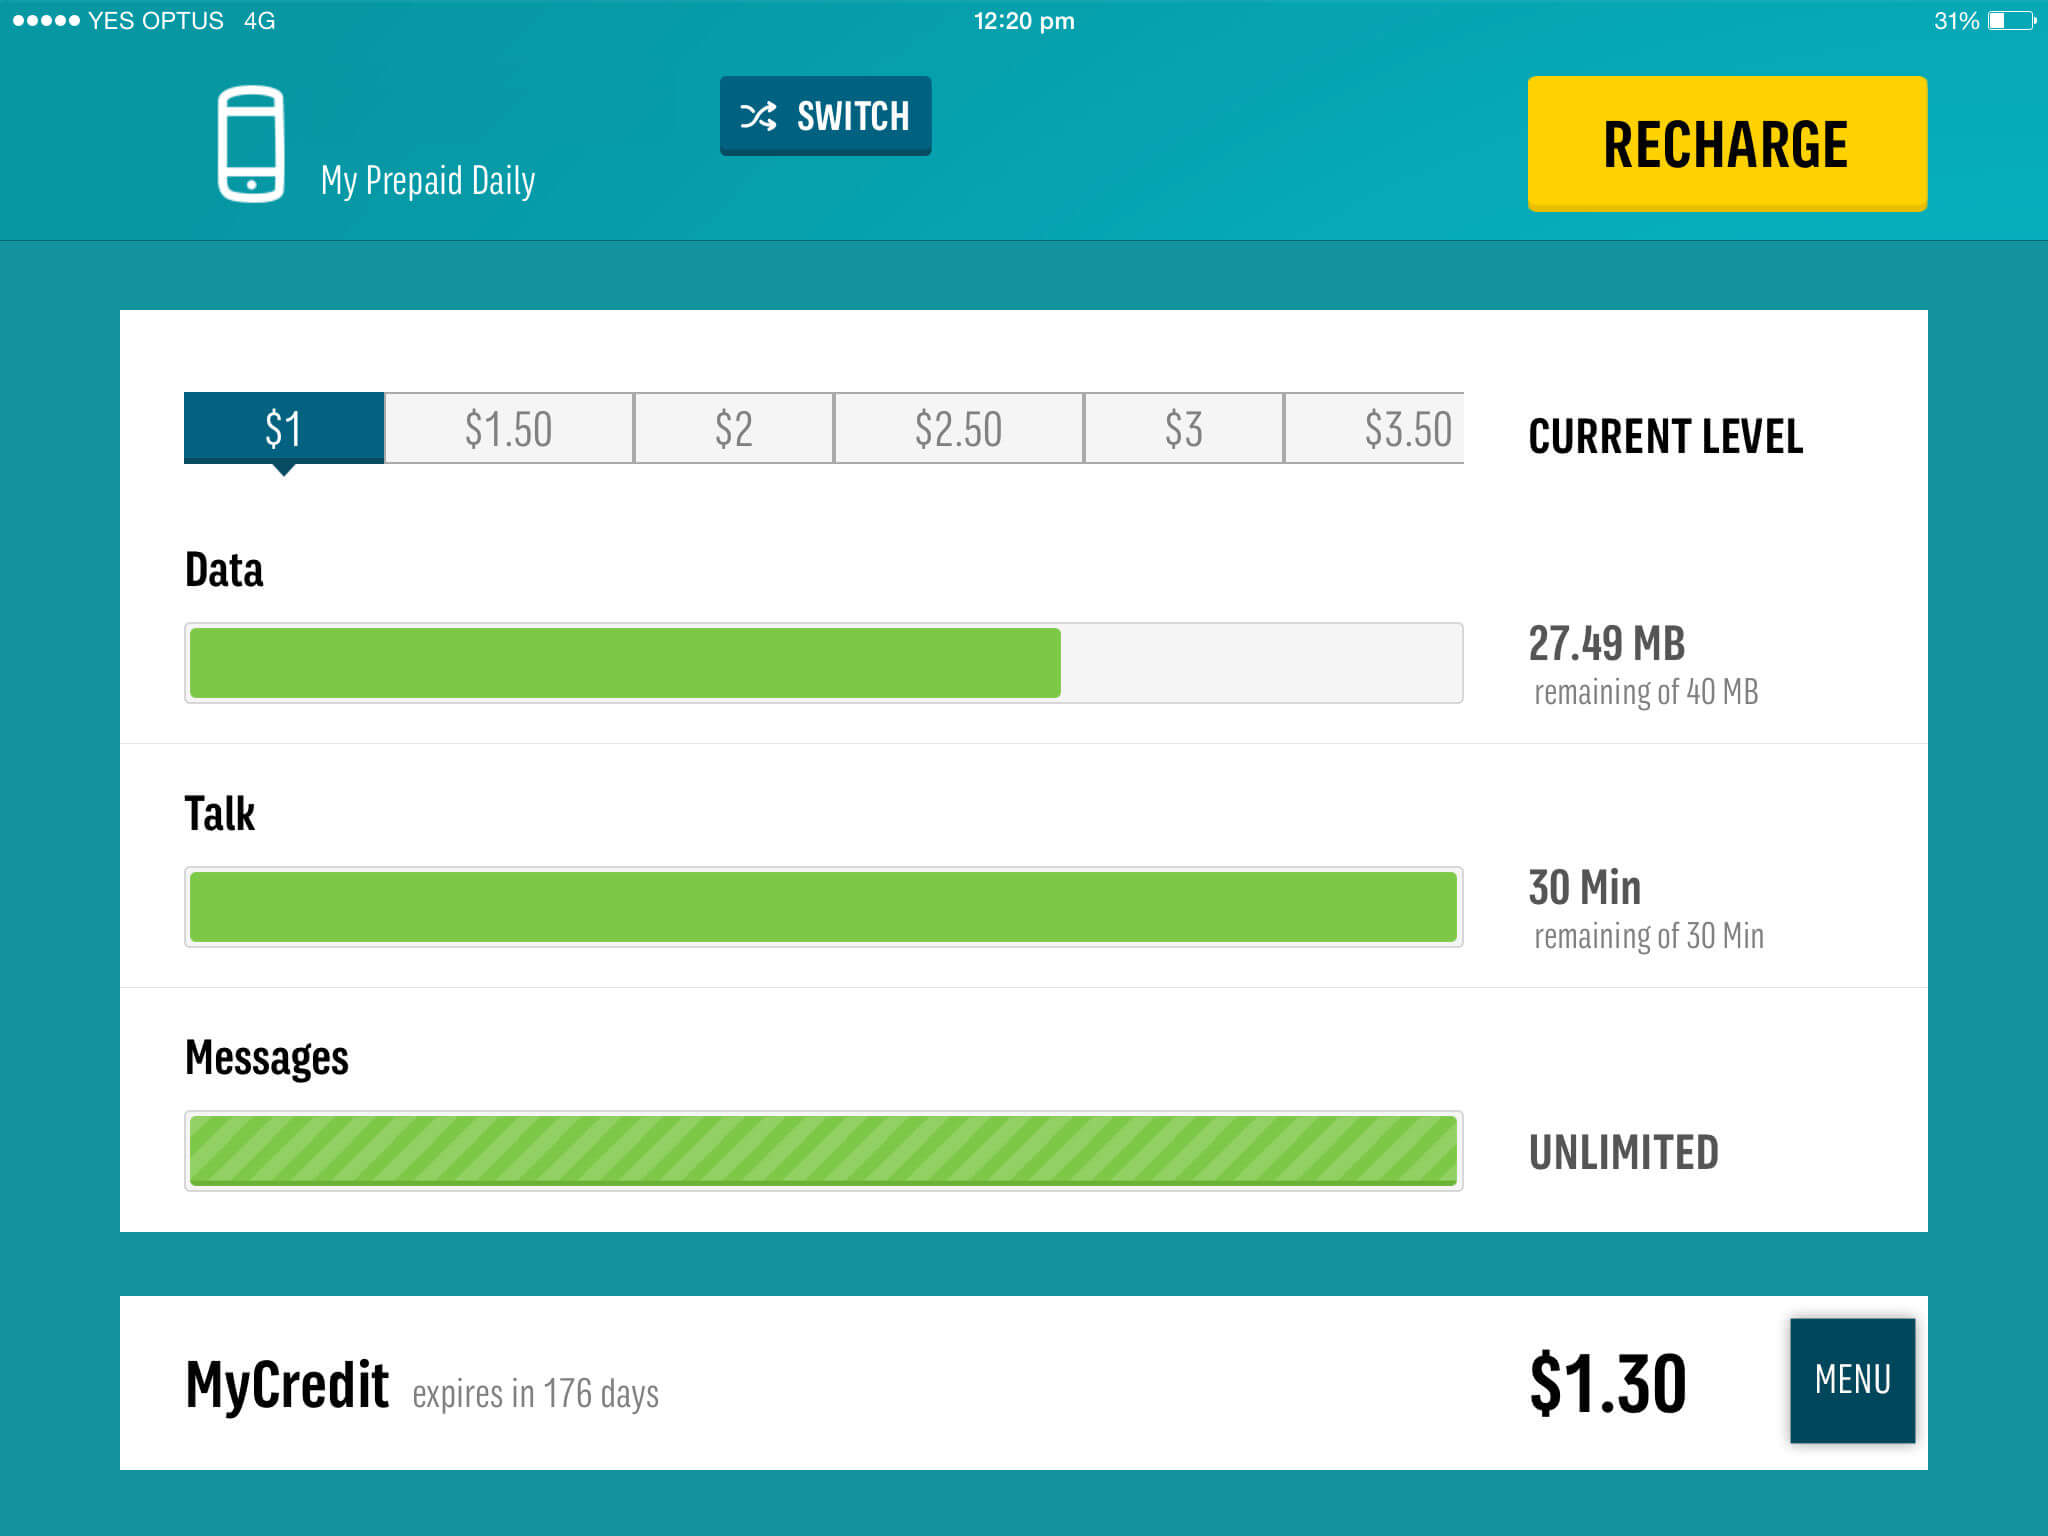 Download Optus Plans for iPad